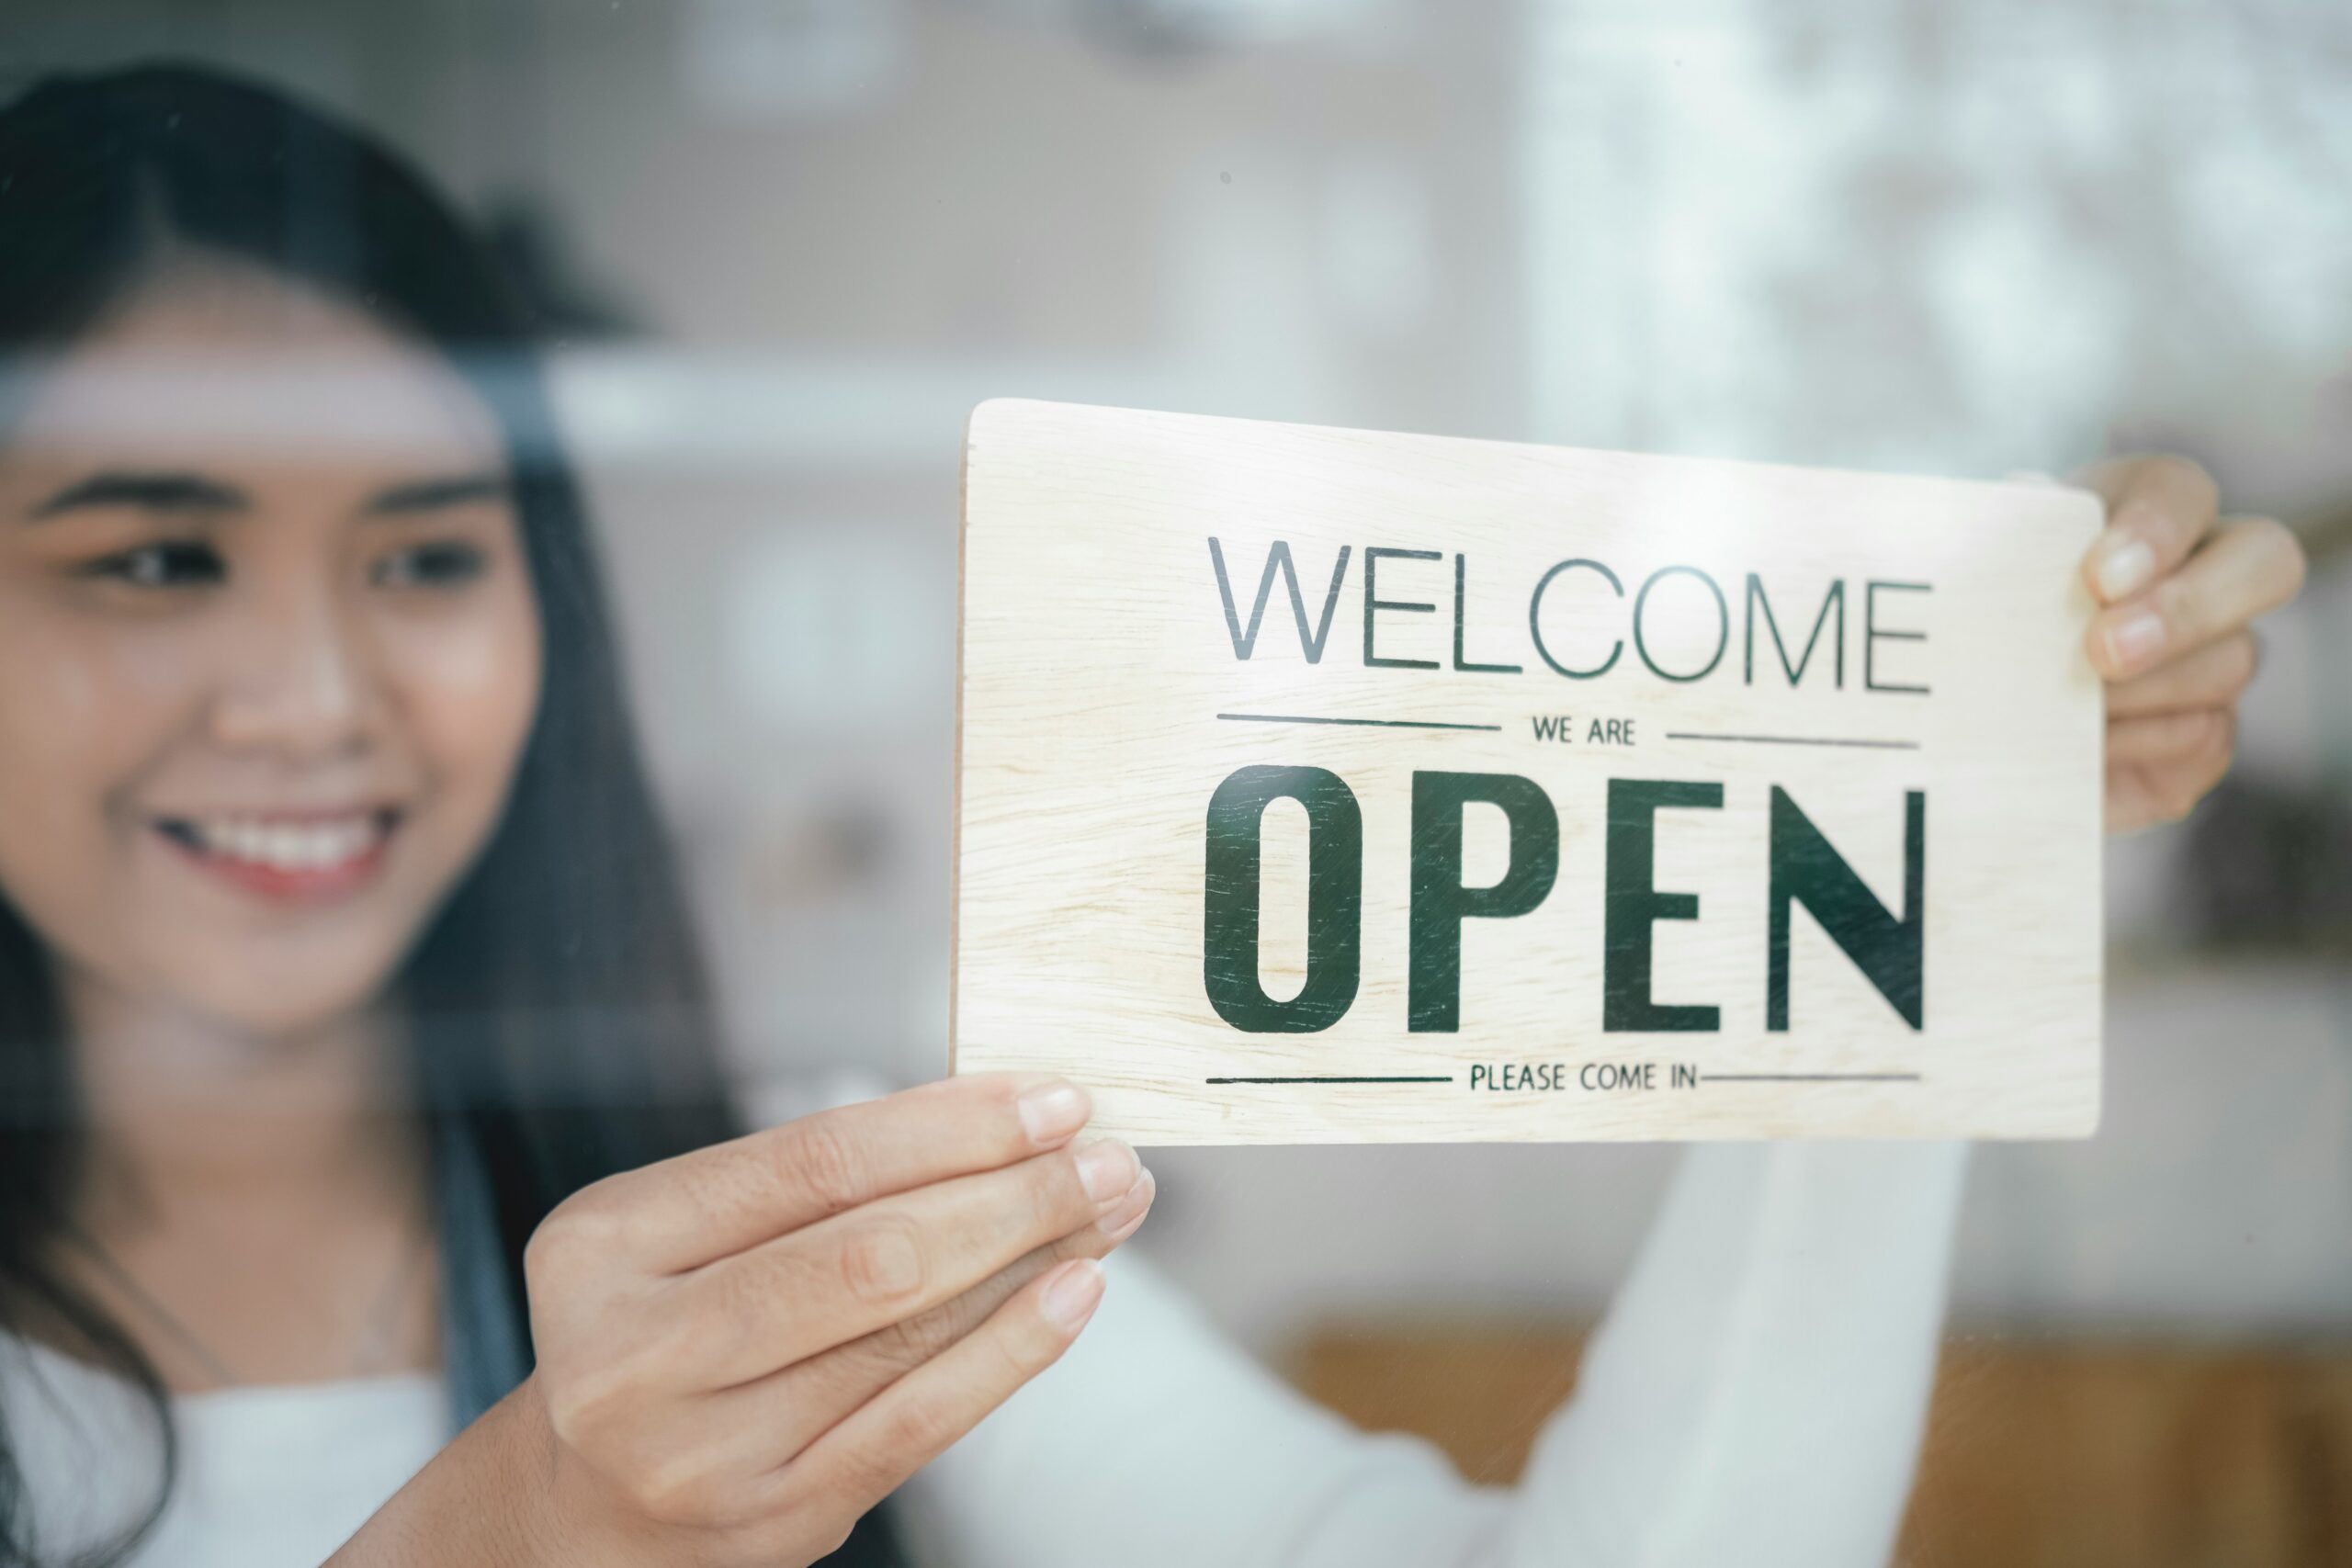 A person holding a "welcome we are open" sign on a glass pane, offering managed IT services for small businesses.